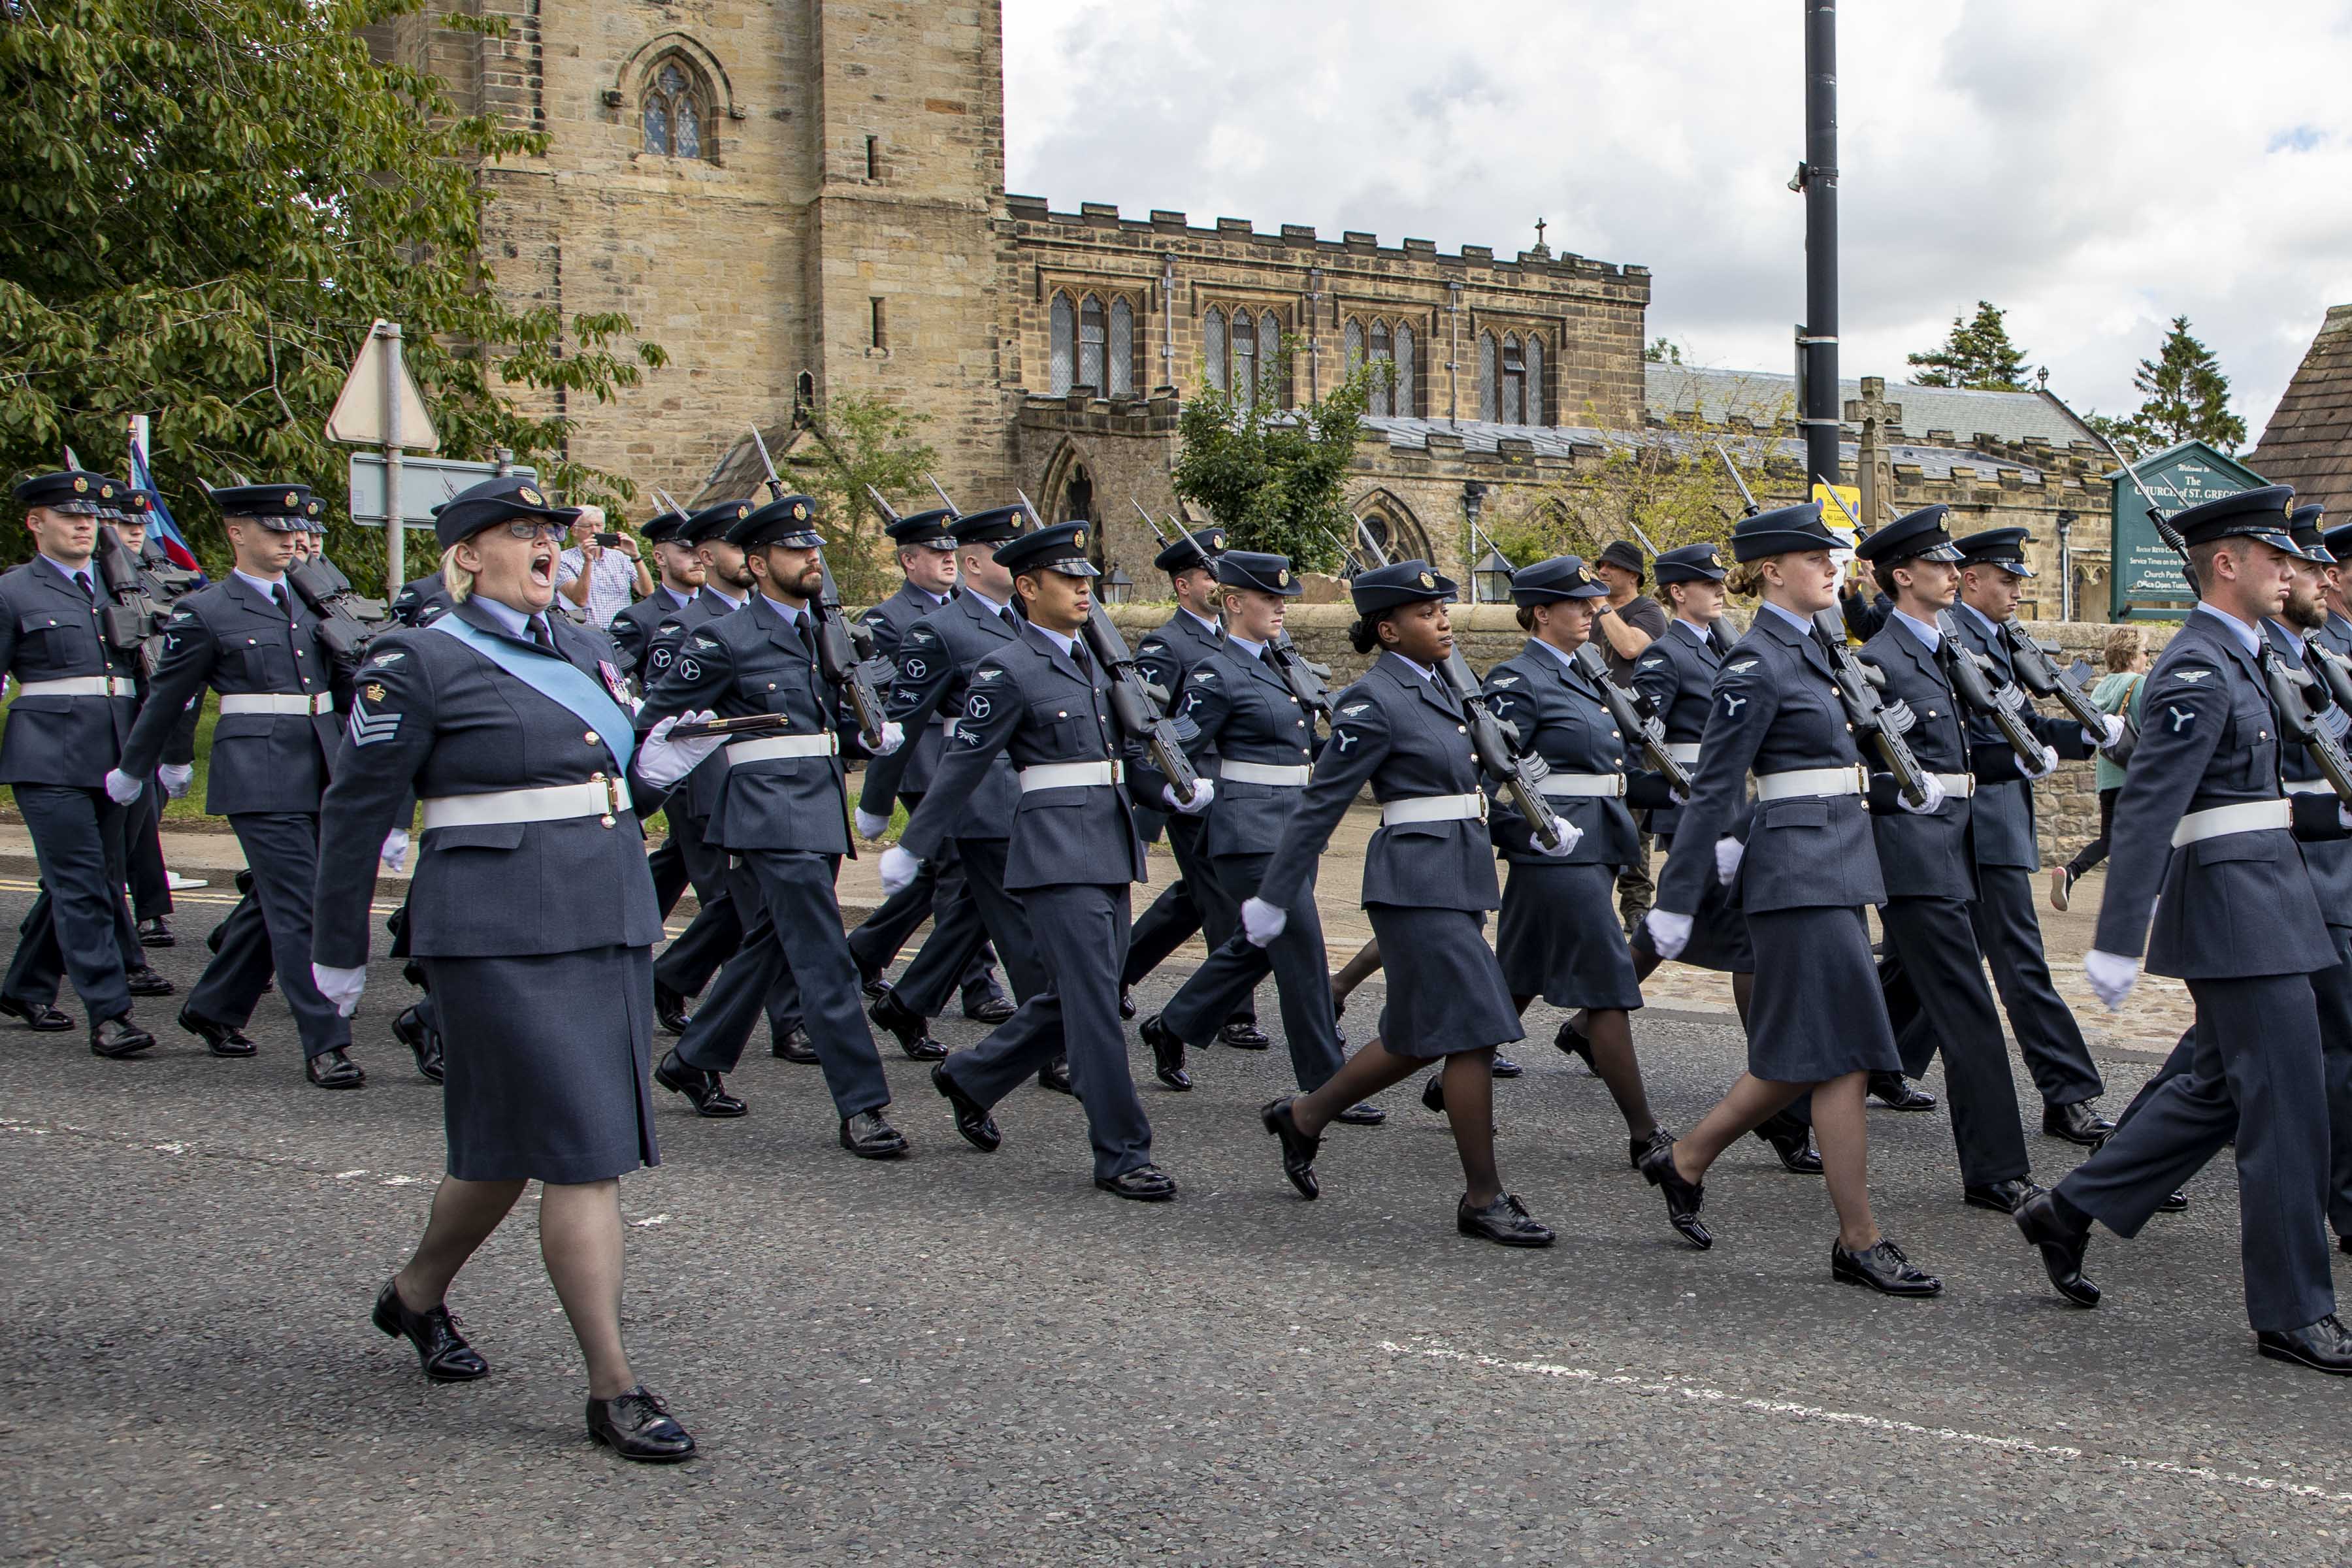 Image shows RAF aviators in parade with cathedral in the background.